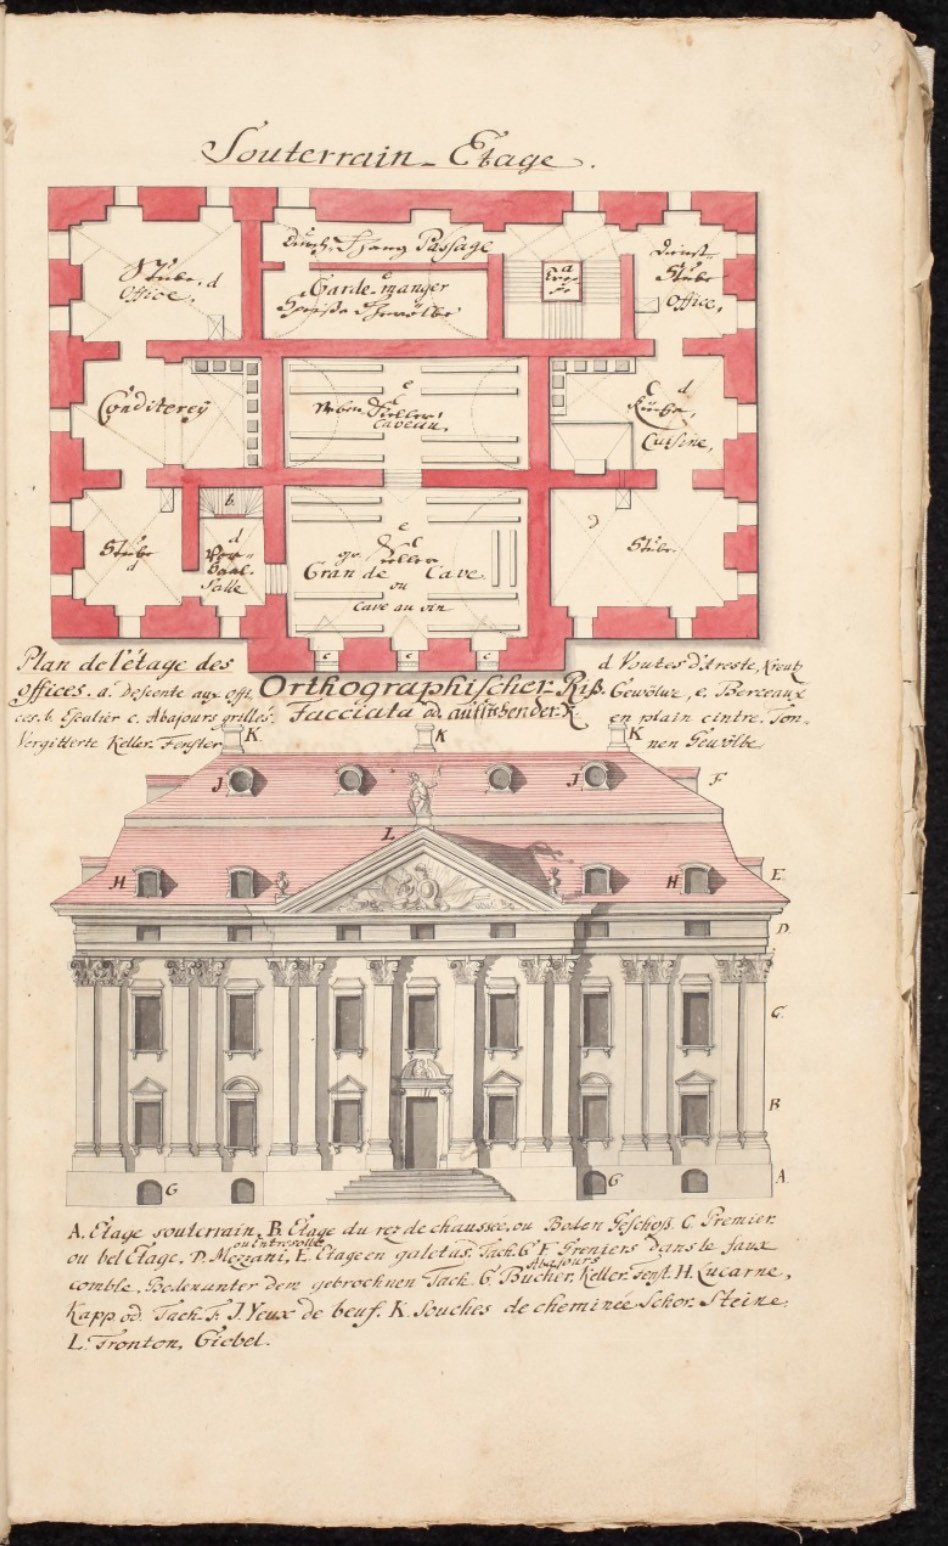 Lectures on architecture [French/German/Latin]<br>18th century